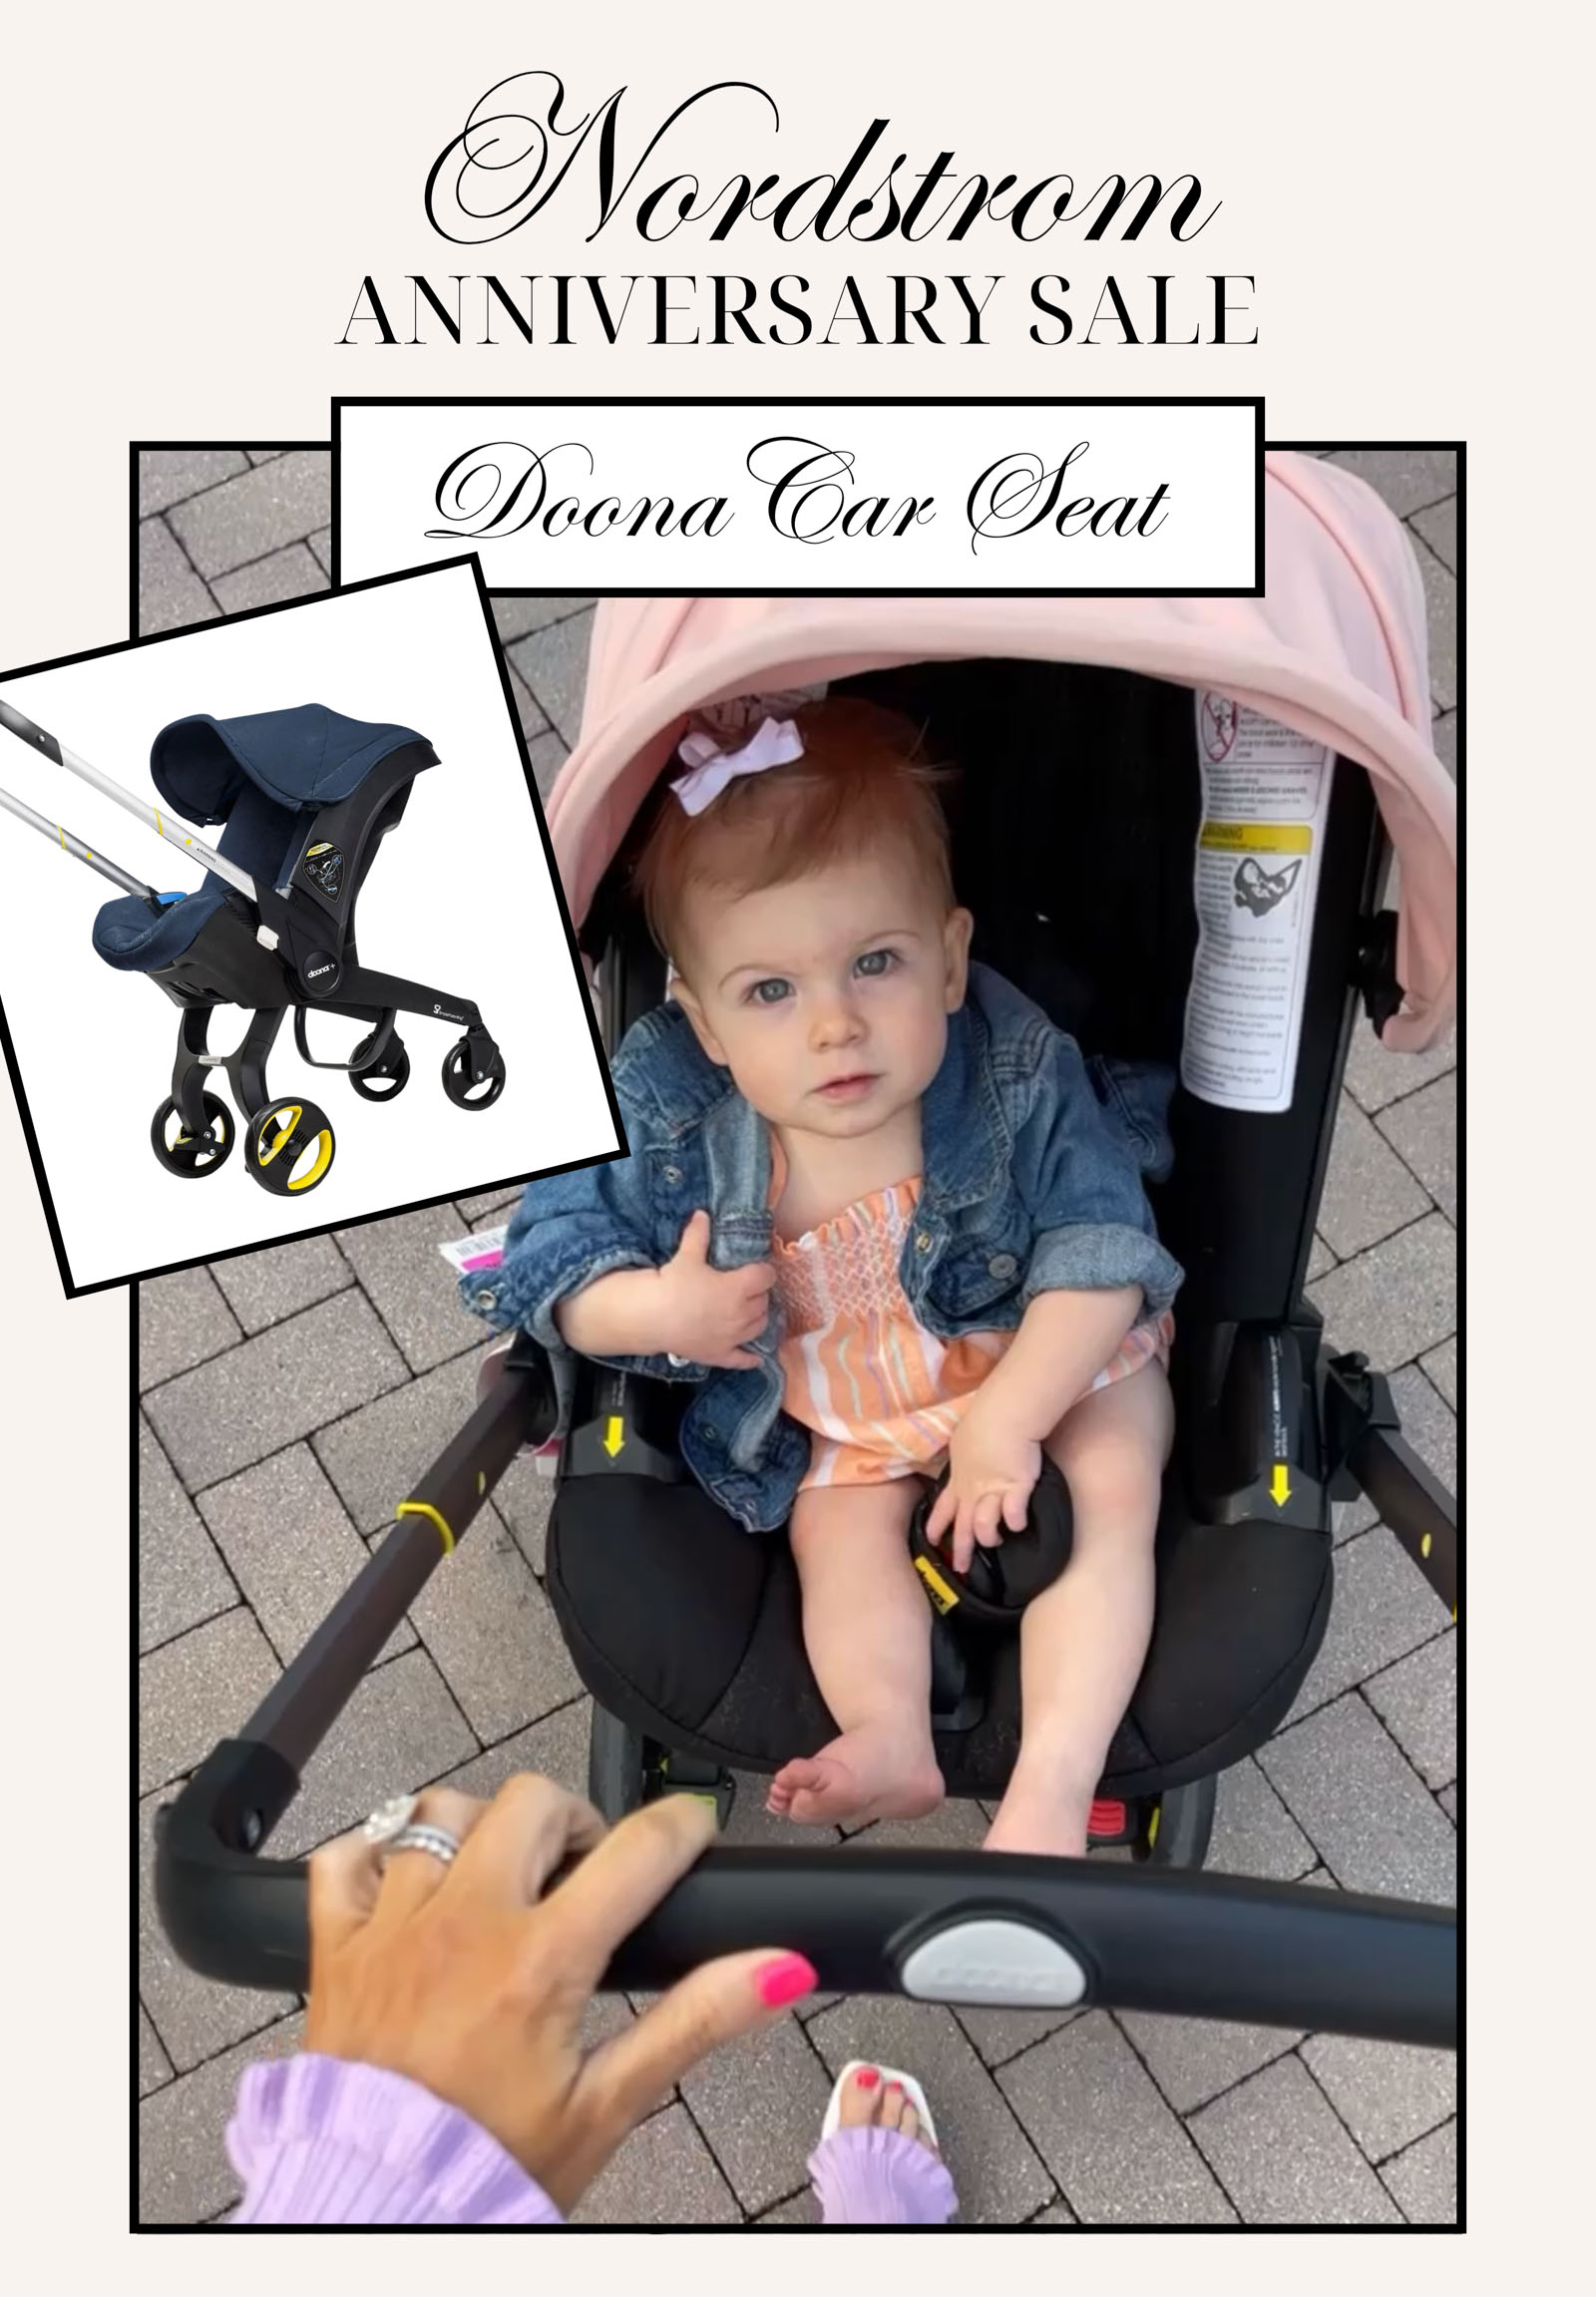 Doona car seat and stroller Nordstrom Anniversary Sale